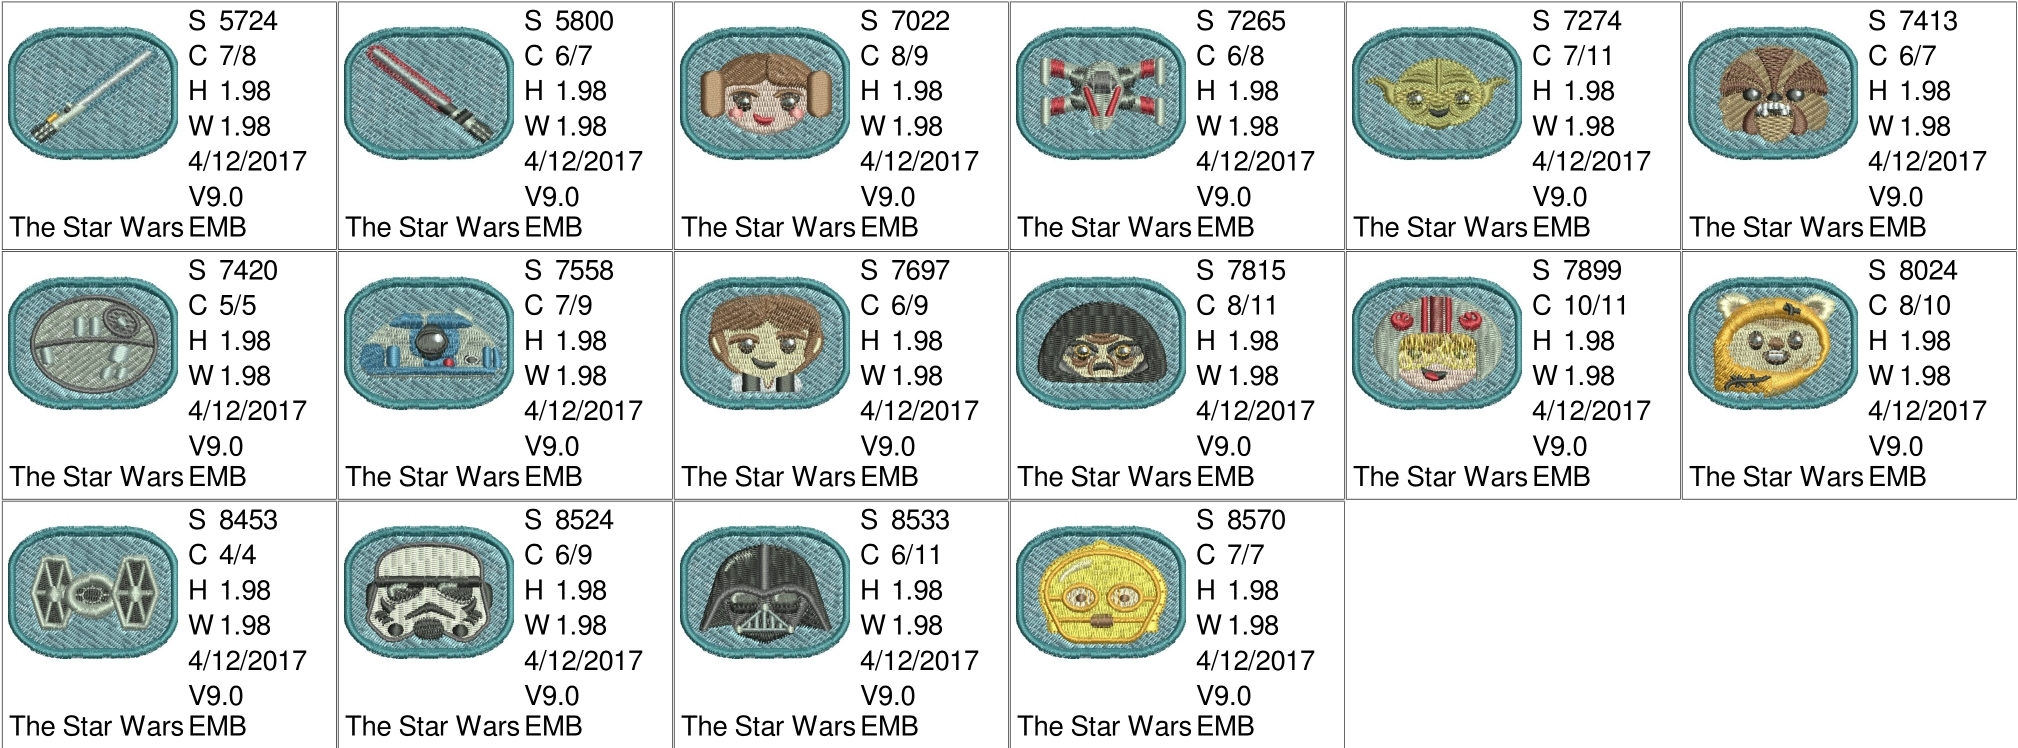 Star Wars Embroidery Pattern Star Wars Emojis Machine Embroidery Designs 16 Resizable Designs For Badges Key Fobs Tshirts Hats Towels Bibs